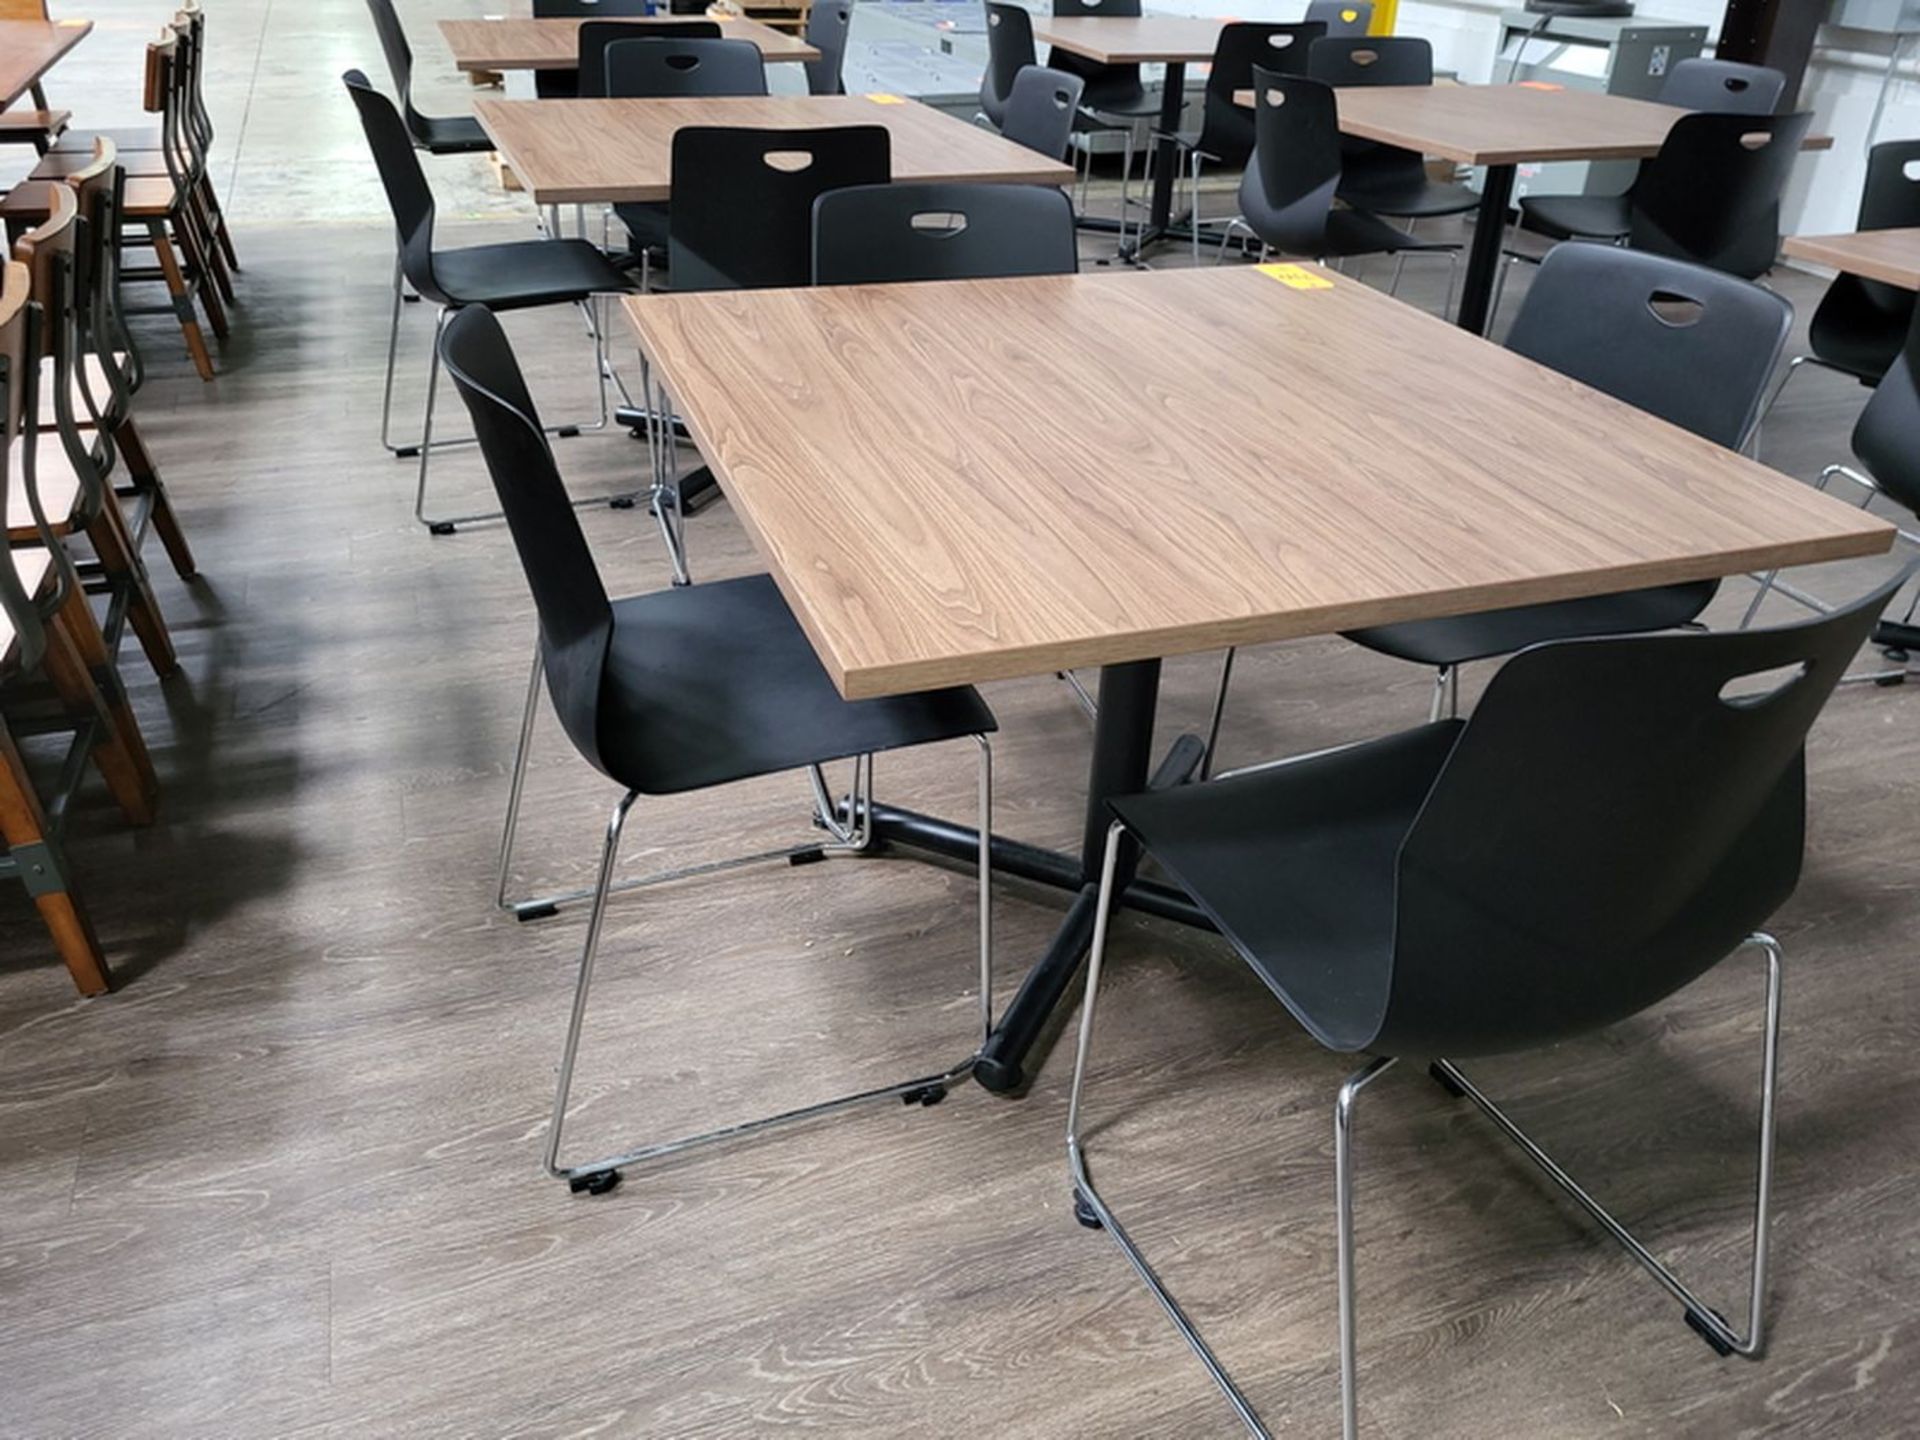 Lot - (3) Lancaster(?) Cafeteria Tables; 42 in. x 42 in. x 29.5 in. high, Includes (12) Stackable